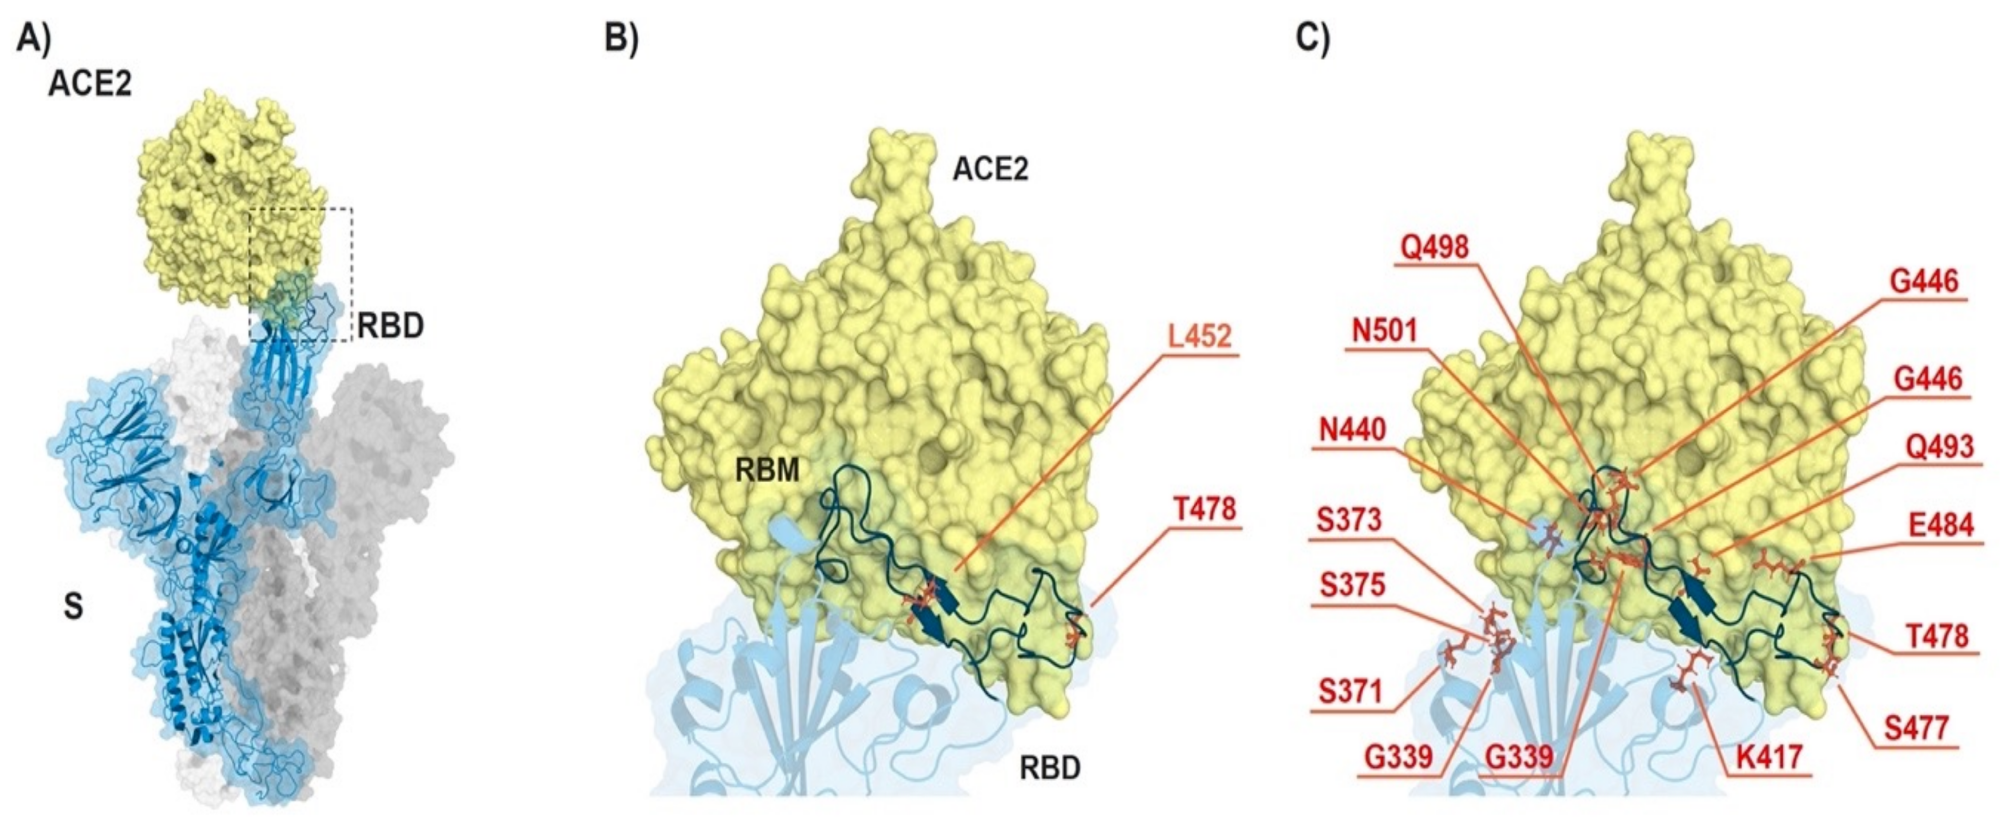 ​​​ACE2-spike interaction and mutations found in RBD of B.1.617.2 (Delta) and B.1.1.529 (Omicron).  (A) S monomer (blue ribbon and surface) bound to ACE2 ectodomain (yellow surface).  (B) Detail of (A), highlighting the mutated residues (orange sticks) in Delta.  (C) Same as in (B) but highlighting the mutated residues in Omicron.  From PDB files 6ACG and 2AJF.